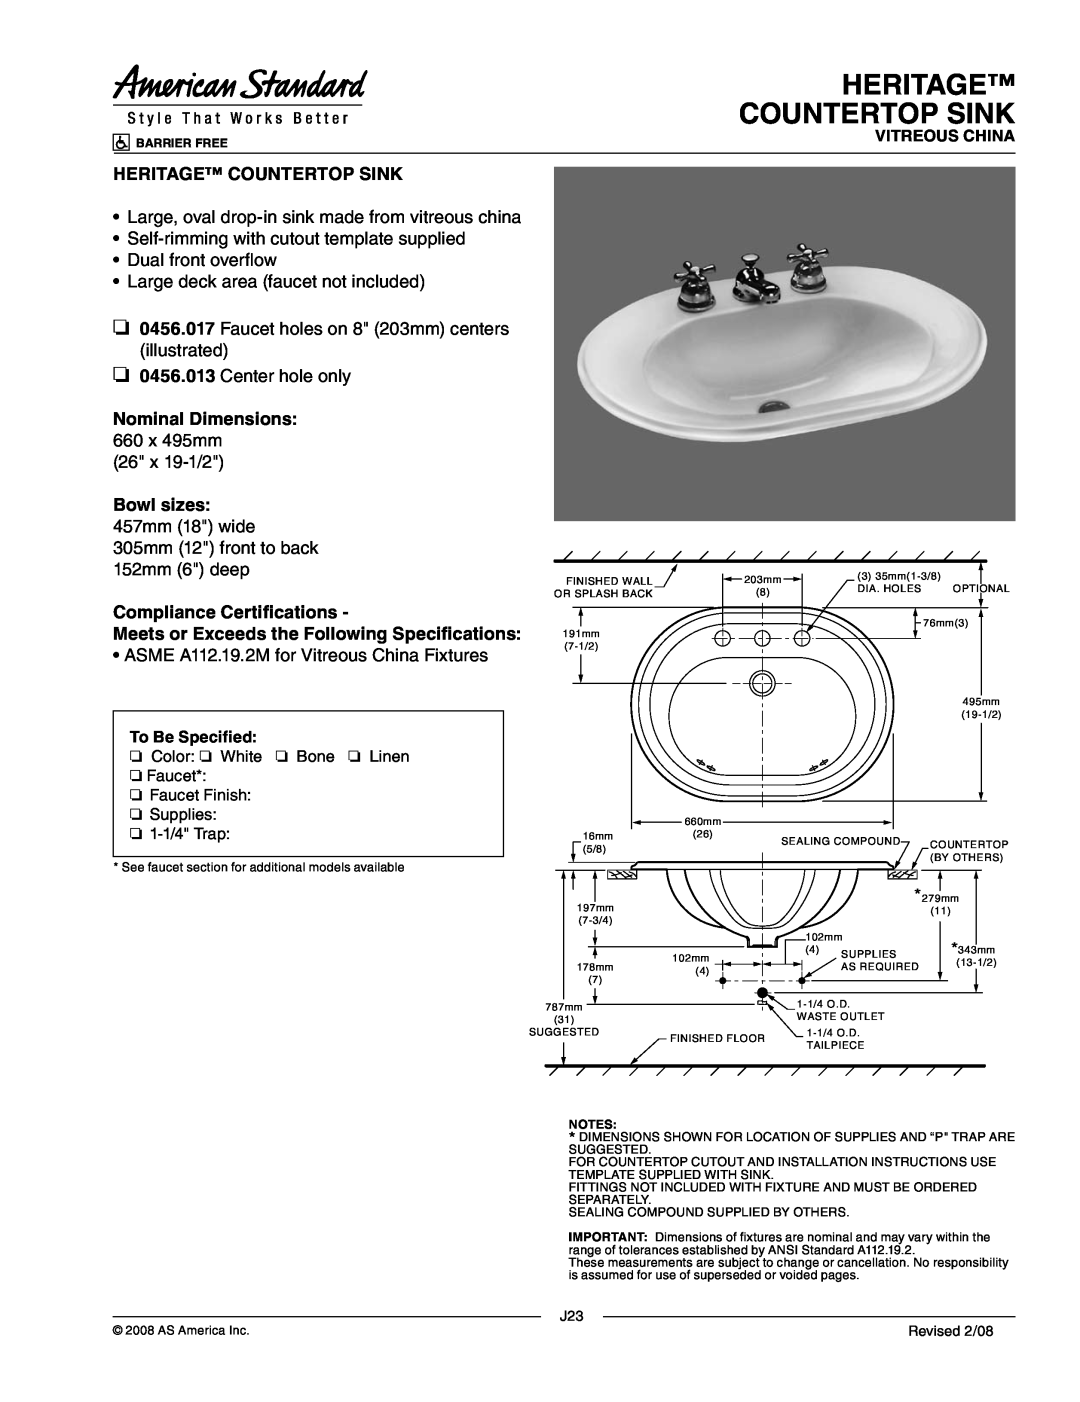 American Standard 0456.013, J23 dimensions Heritage Countertop Sink, Large, oval drop-insink made from vitreous china 